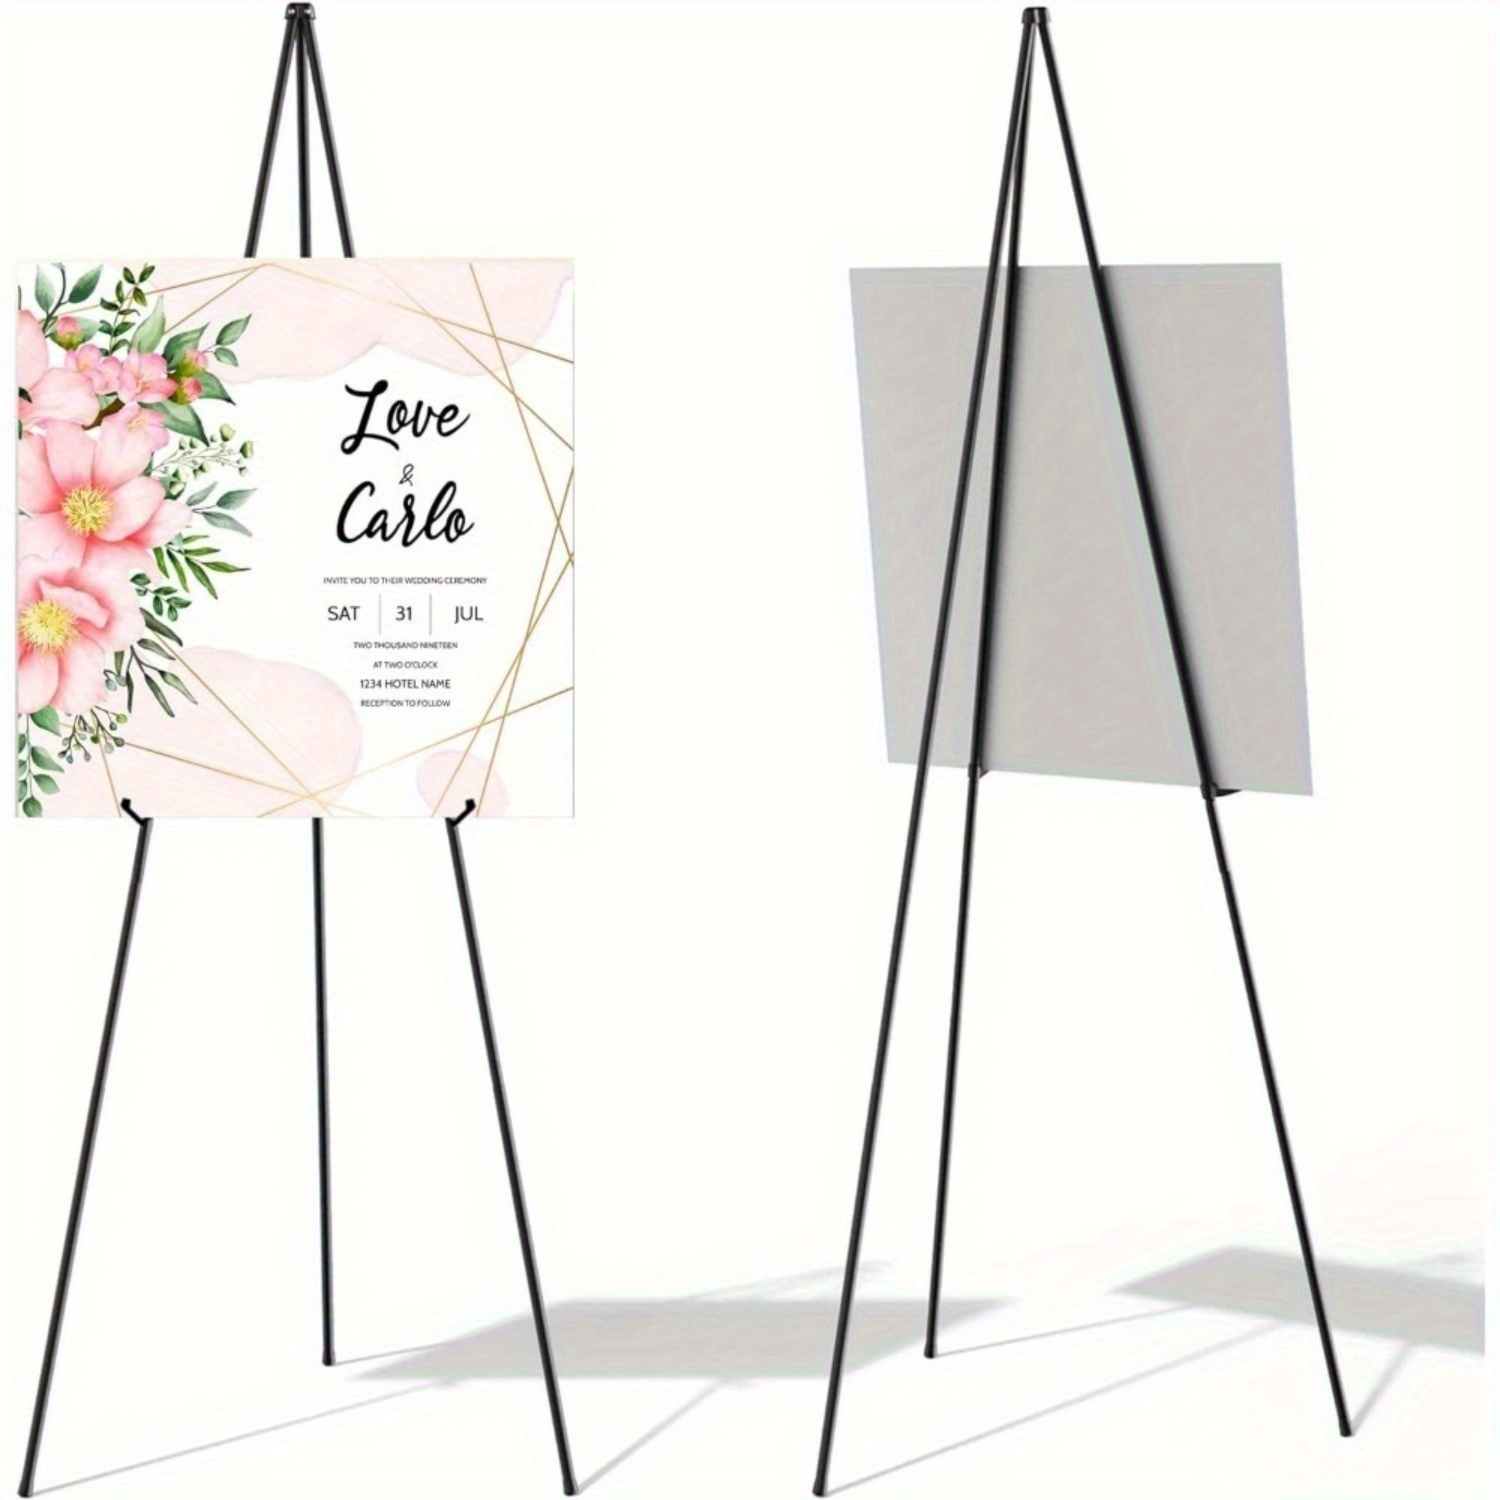 Office Mini STABLE TRIPOD Art Supplies Craft Small Easels Wedding